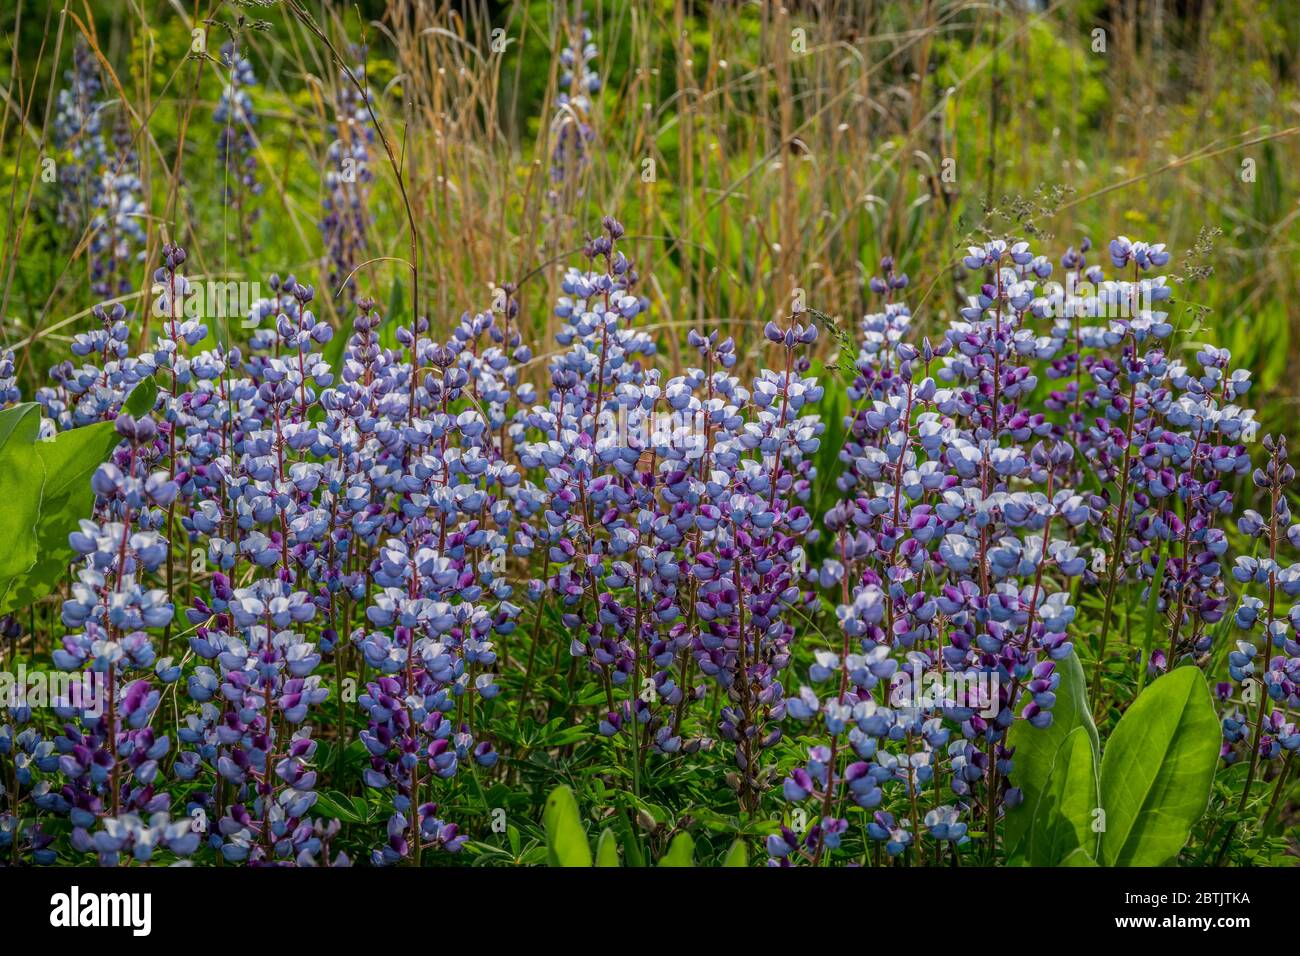 A cluster of colorful purple lupines growing together upright among the other prairie plants and tall grasses in an open meadow on a bright sunny day Stock Photo